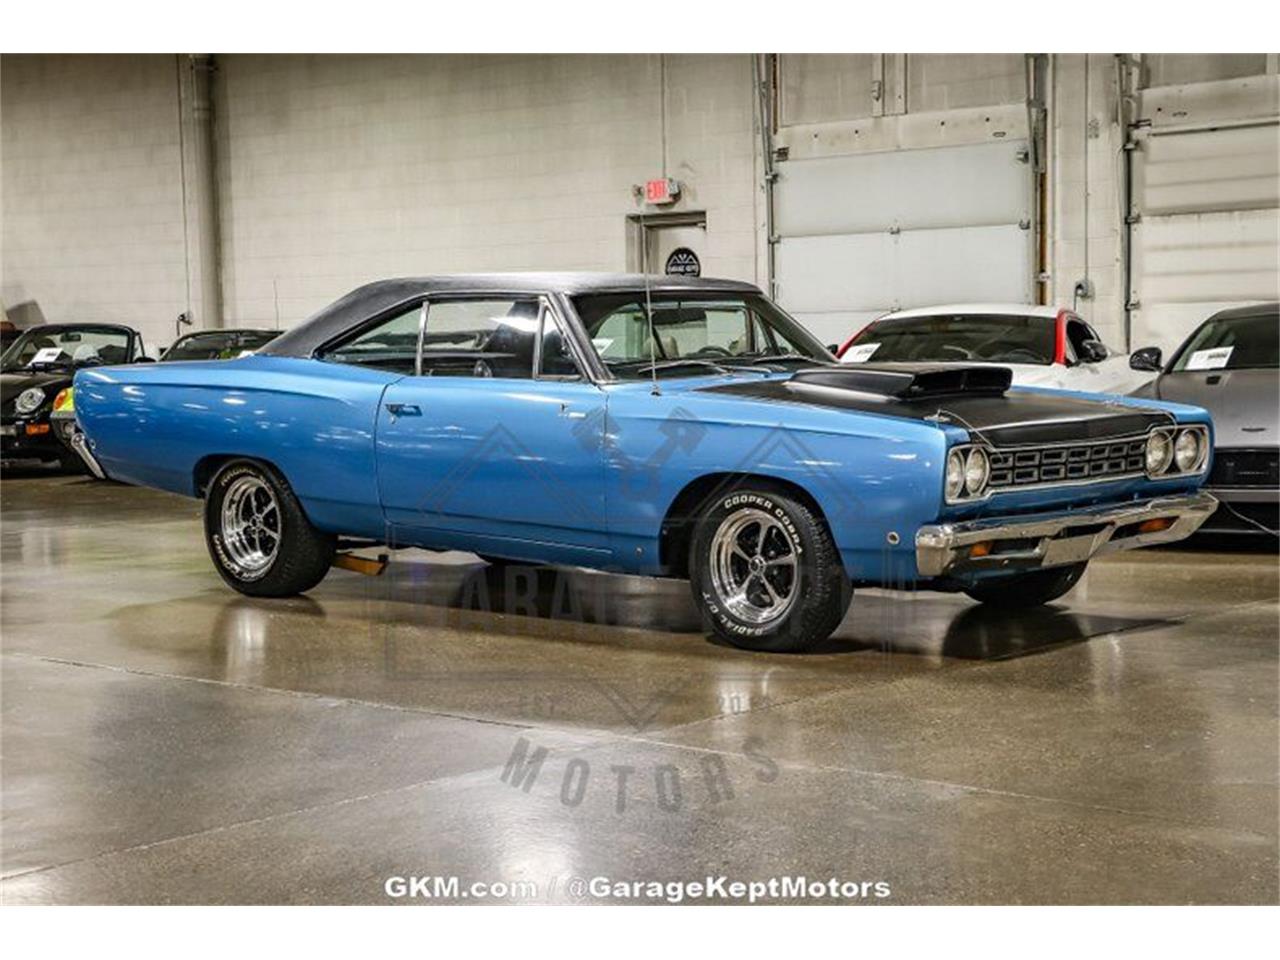 For Sale: 1968 Plymouth Road Runner in Grand Rapids, Michigan for sale in Grand Rapids, MI